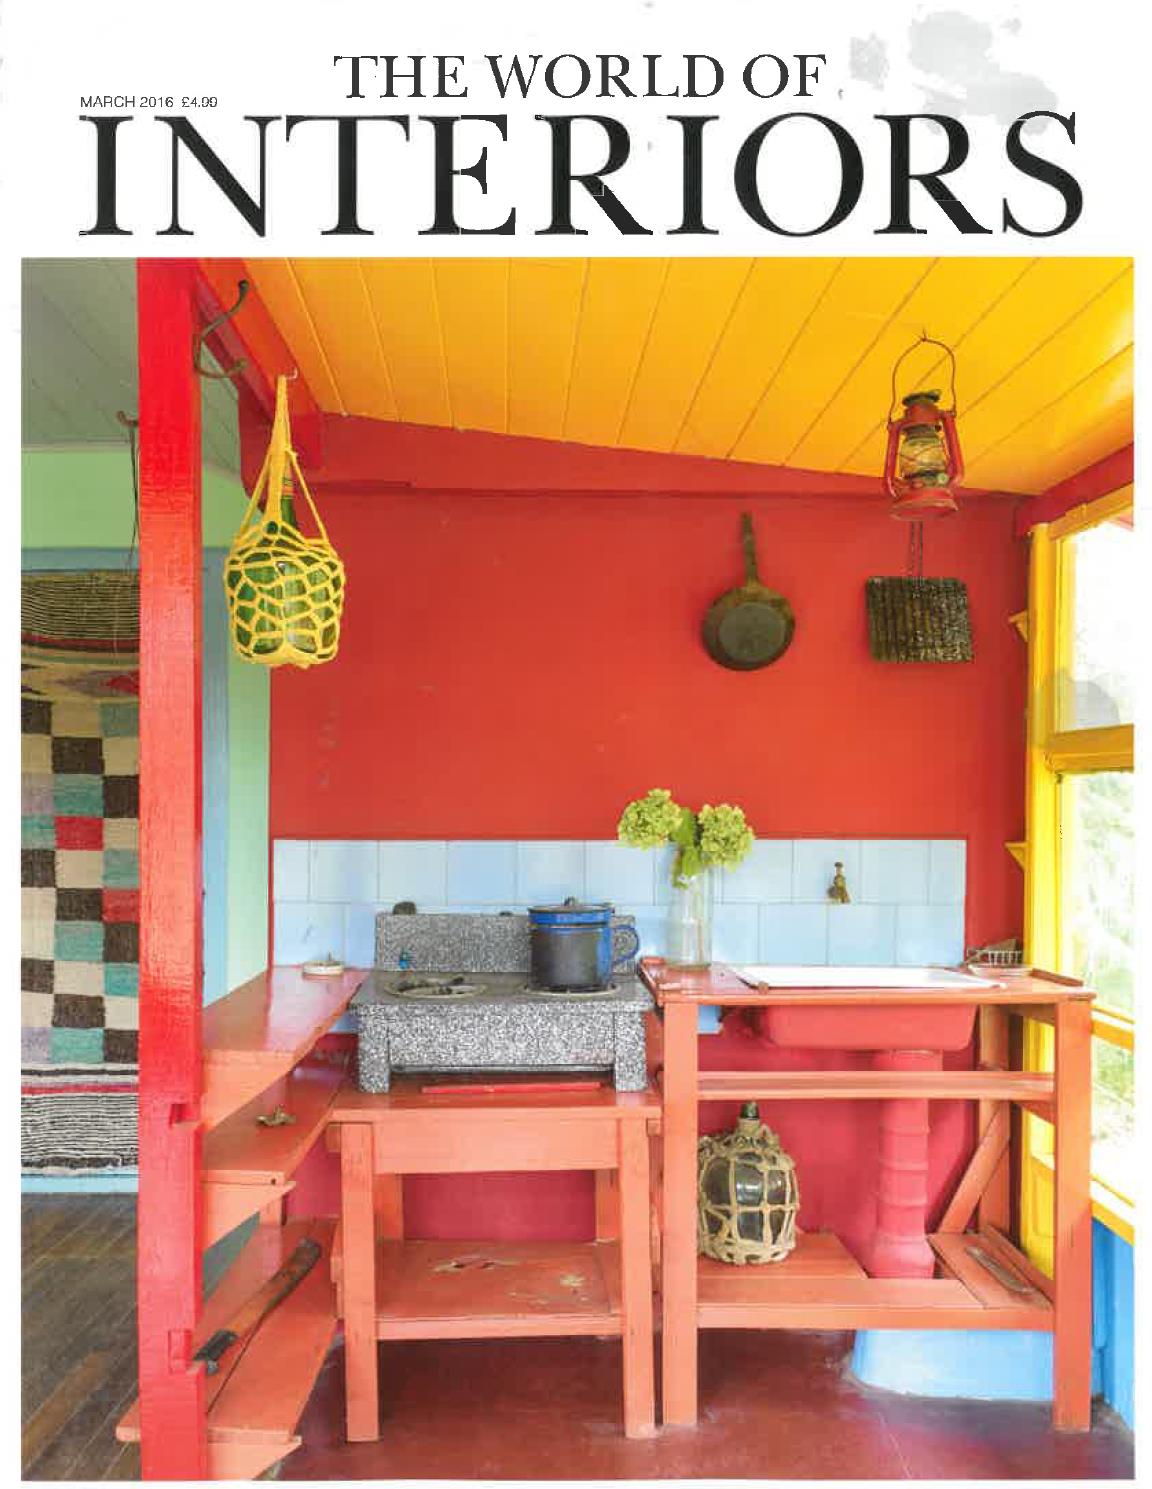 World of Interiors features my ‘Moroccan Tiles’ throws